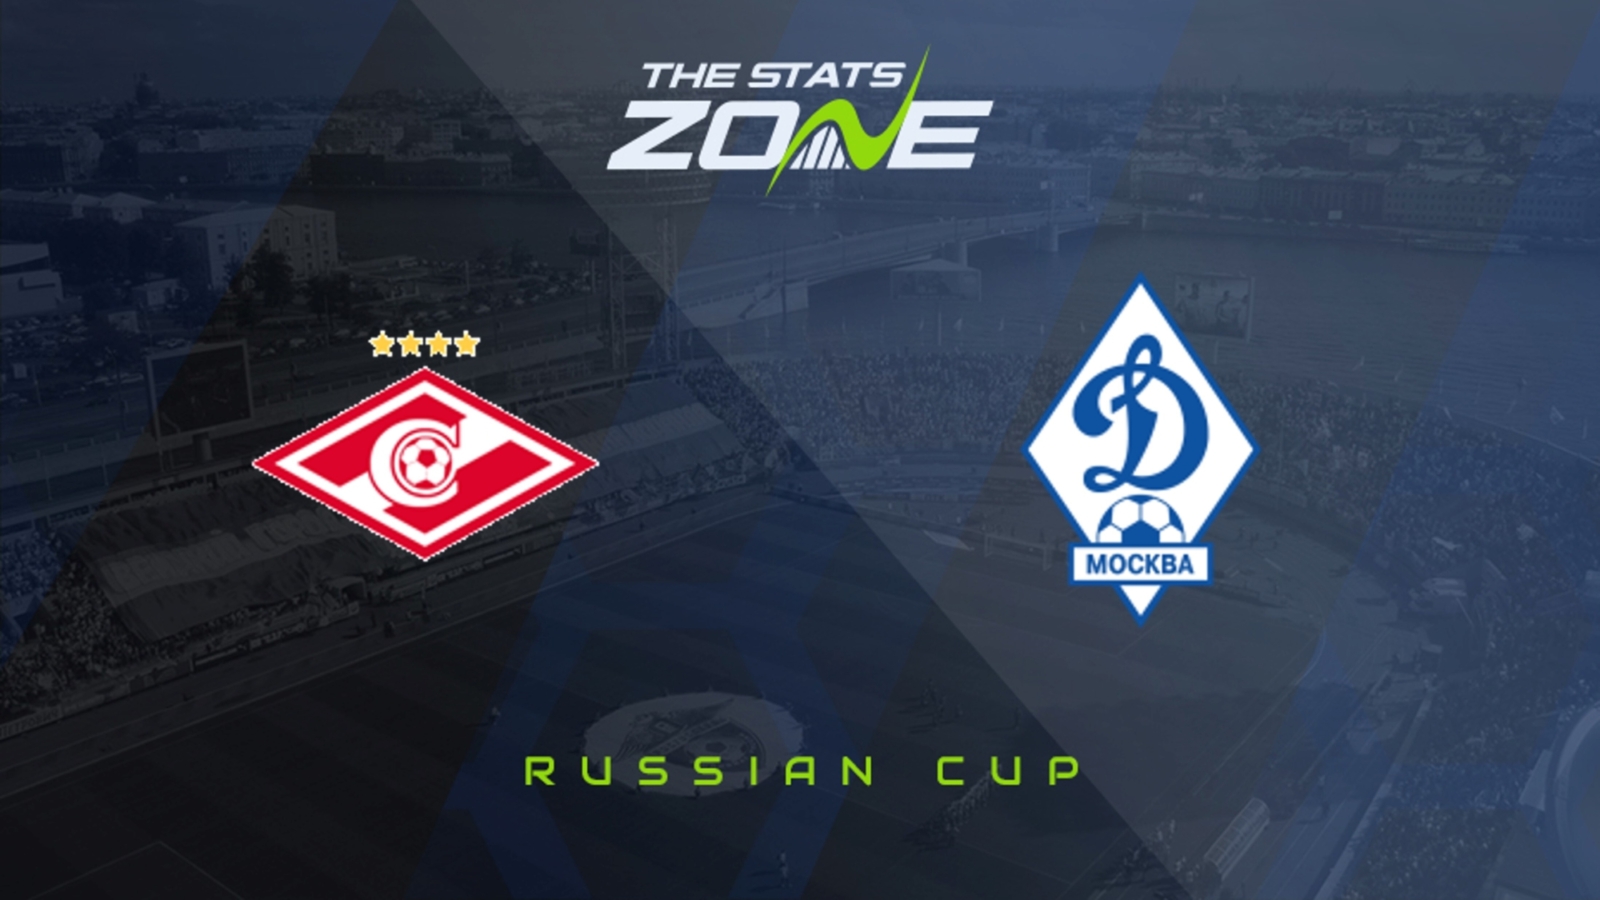 Spartak Moscow vs Dinamo Moscow Prediction and Betting Tips